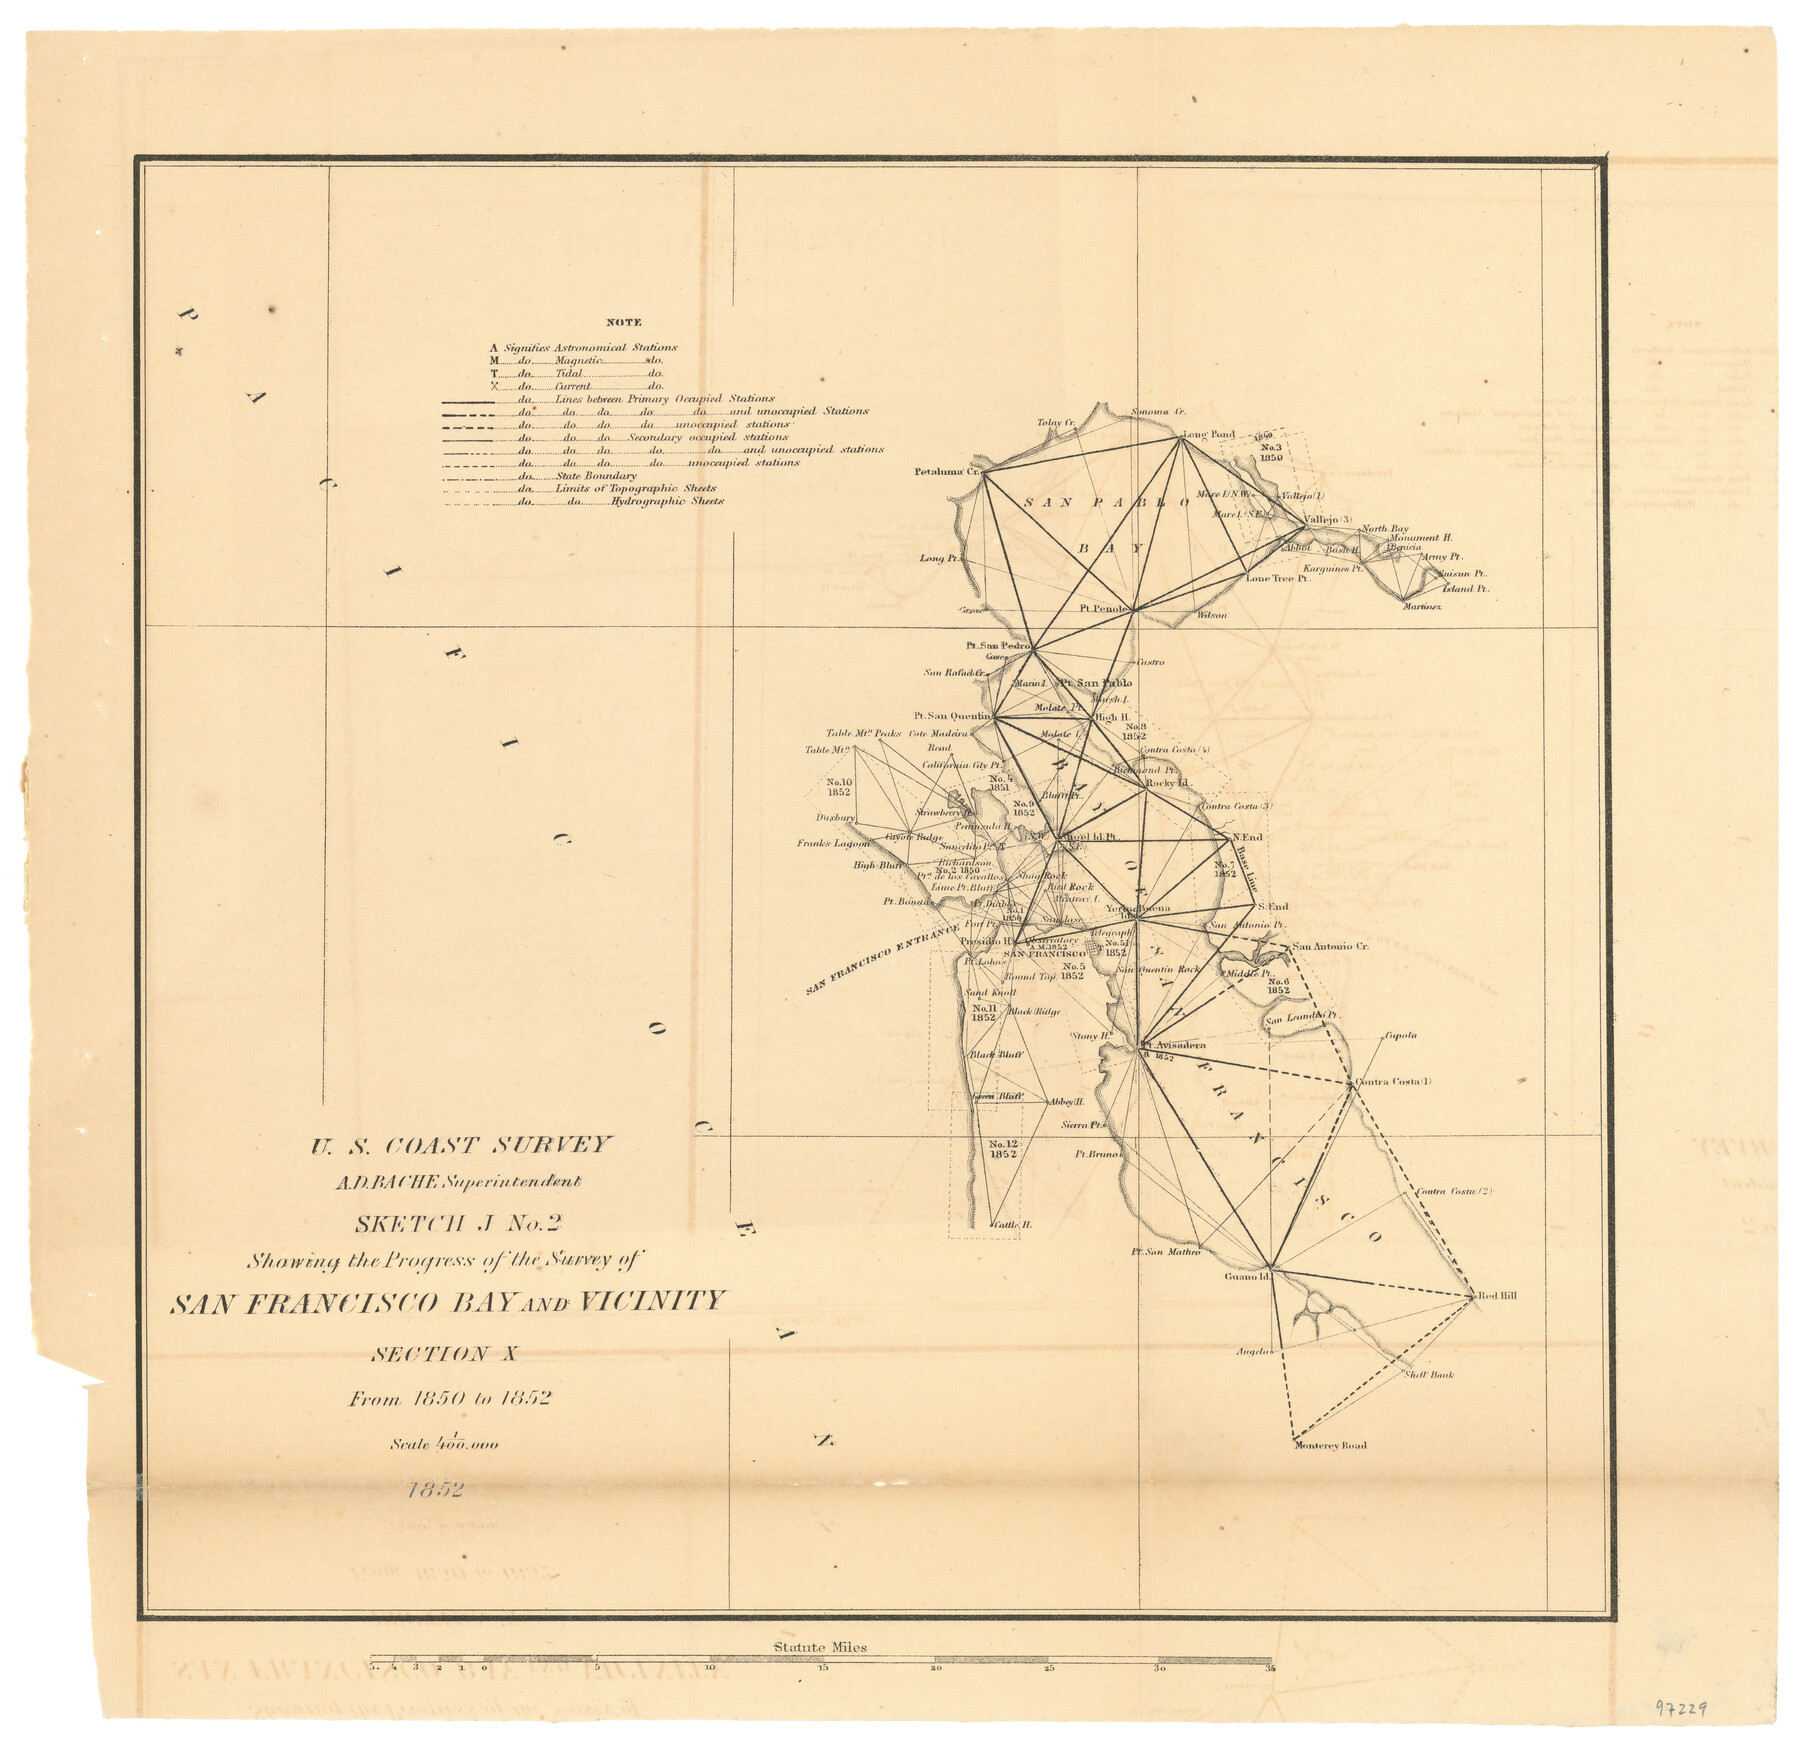 97229, Sketch J No. 2 Showing the Progress of the Survey of San Francisco Bay and Vicinity Section X From 1850 to 1852, General Map Collection